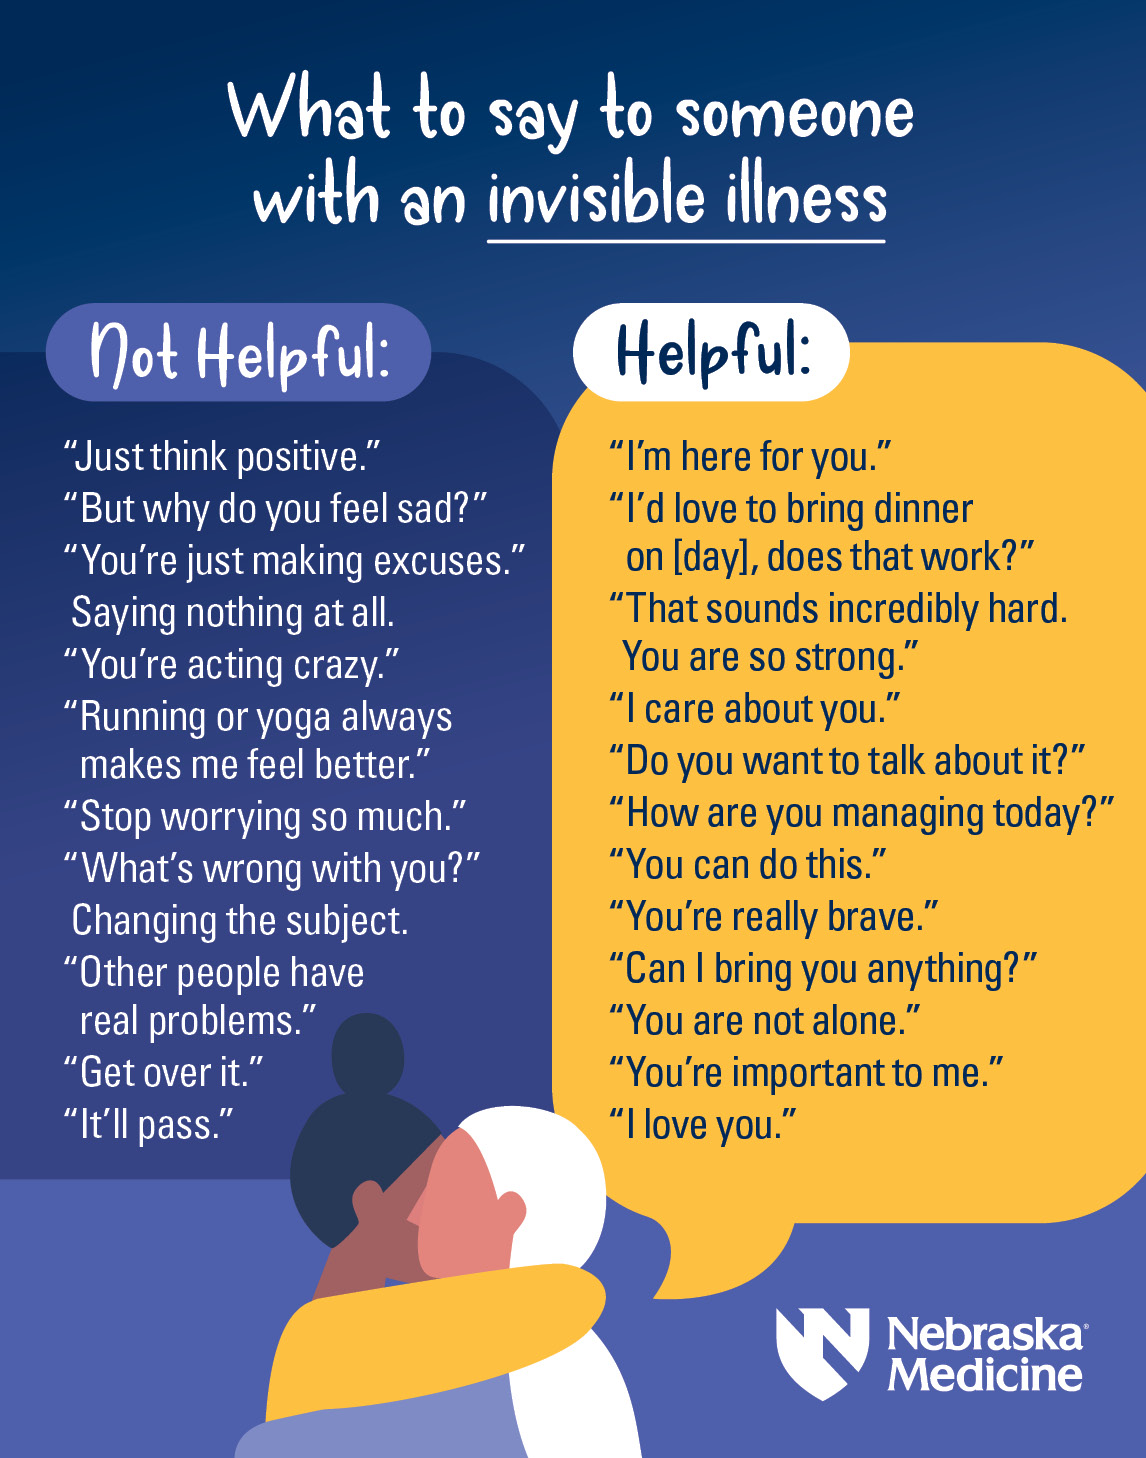 How to help someone with an invisible illness